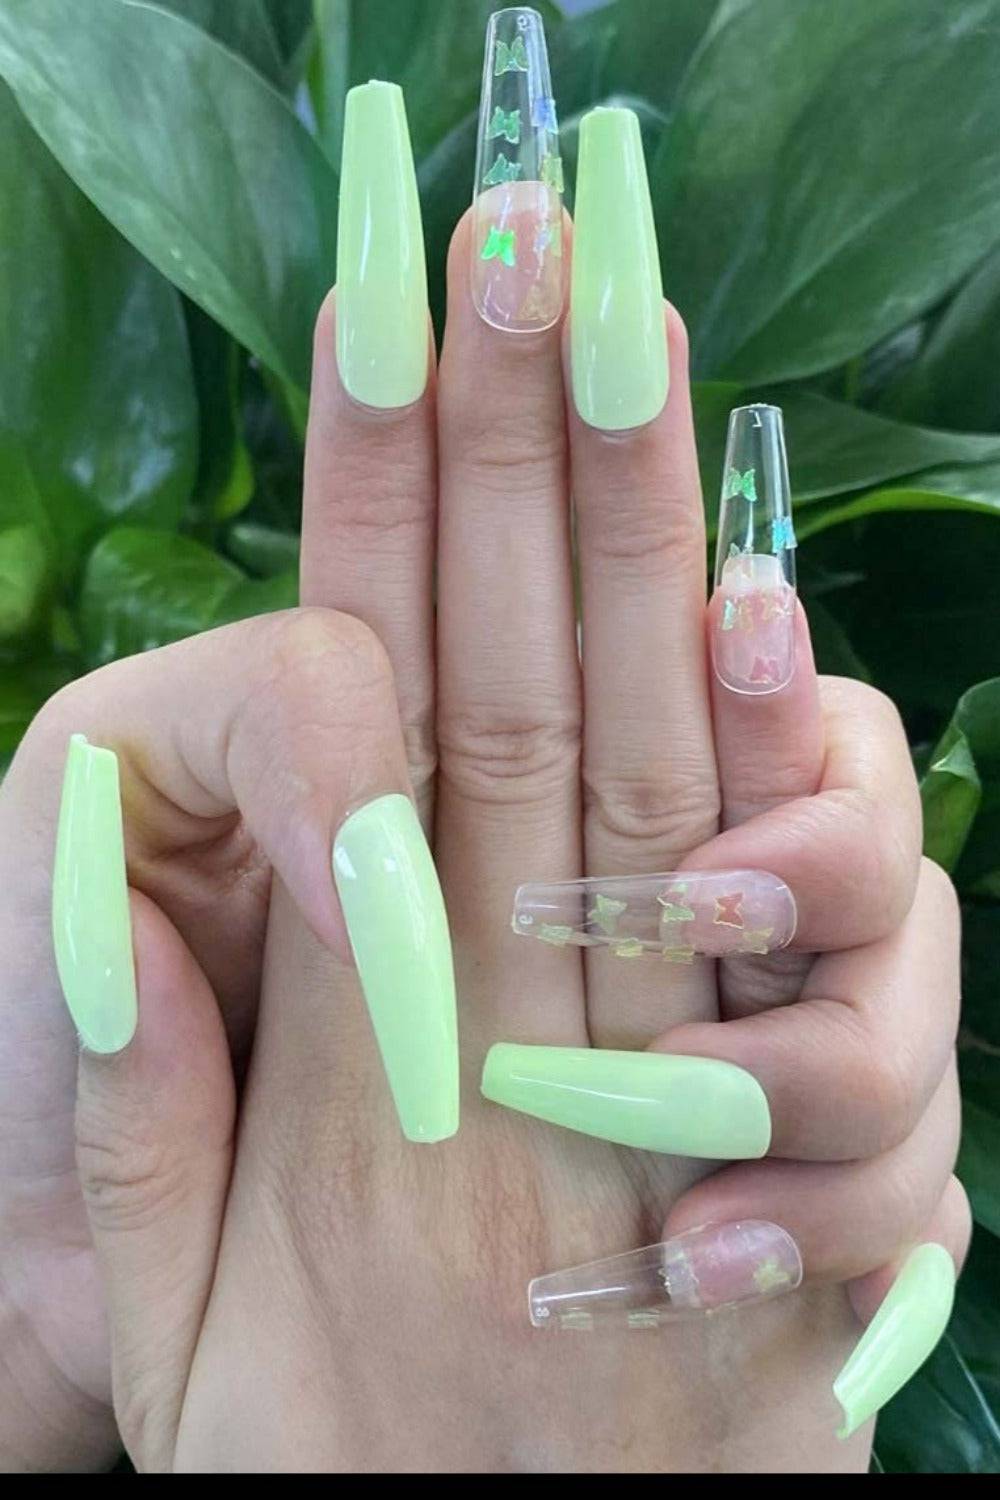 Matcha Nails Are The Dreamy Summer Trend To Try | Glamour UK